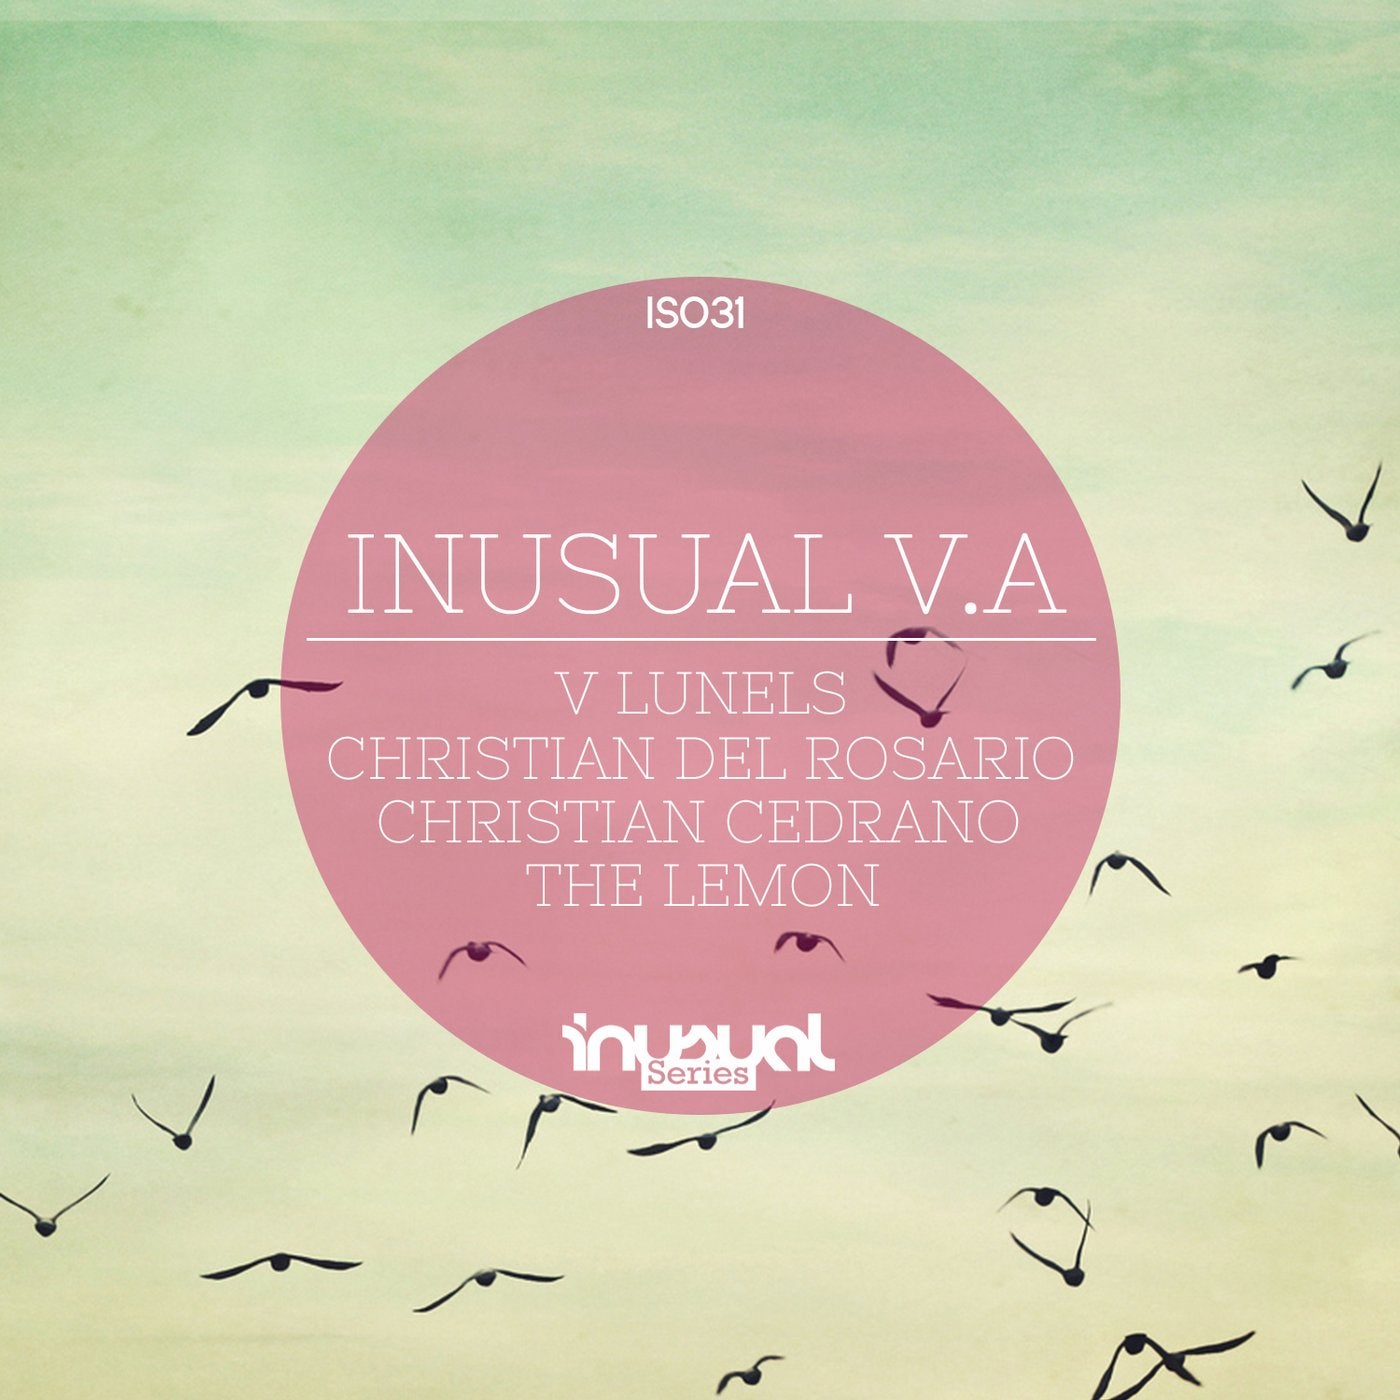 Inusual V.A